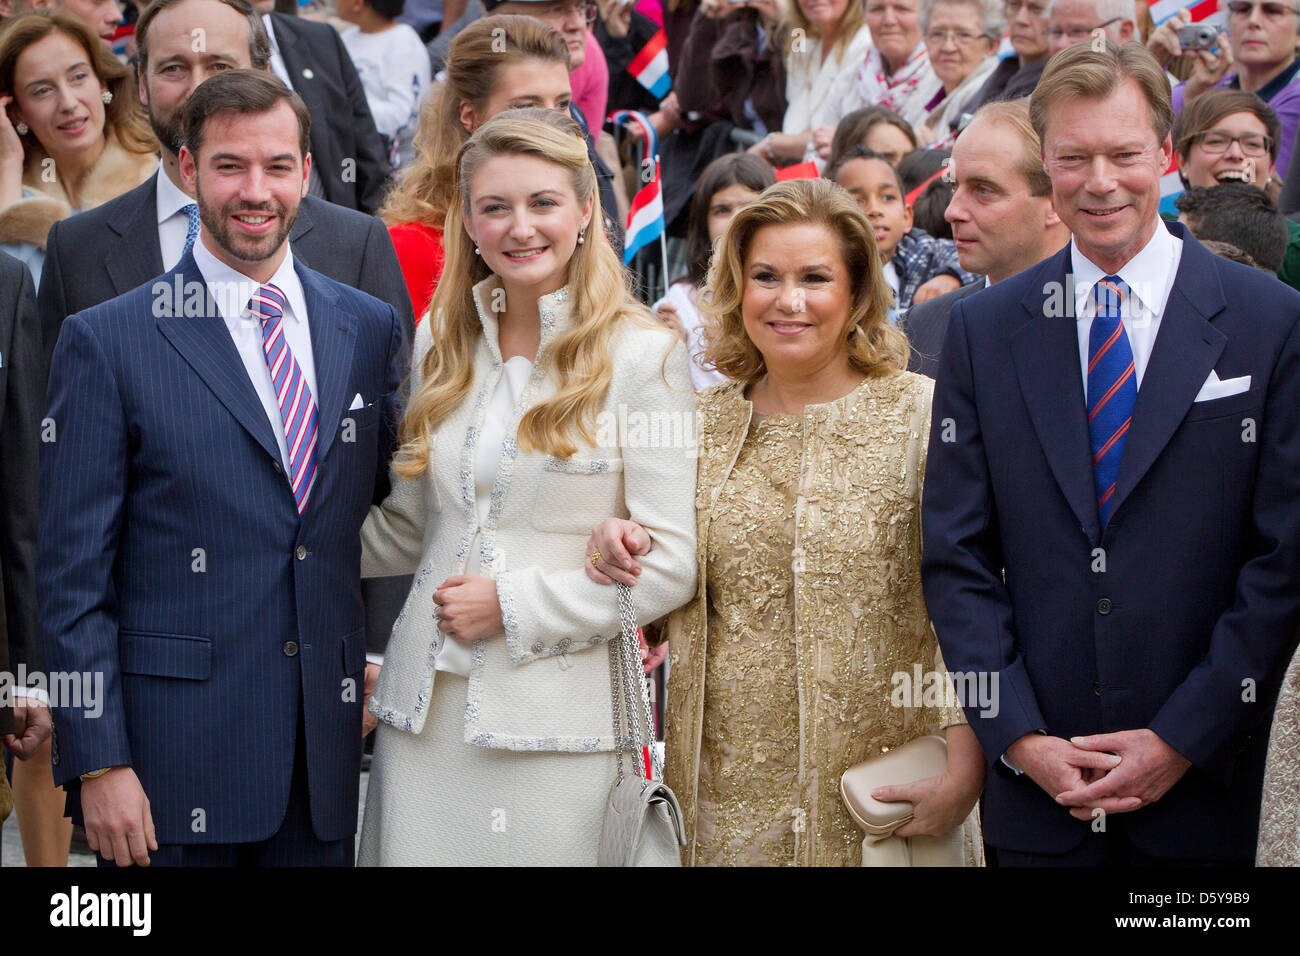 guillaume-hereditary-grand-duke-of-luxembourg-and-countess-stphanie-D5Y9B9.jpg